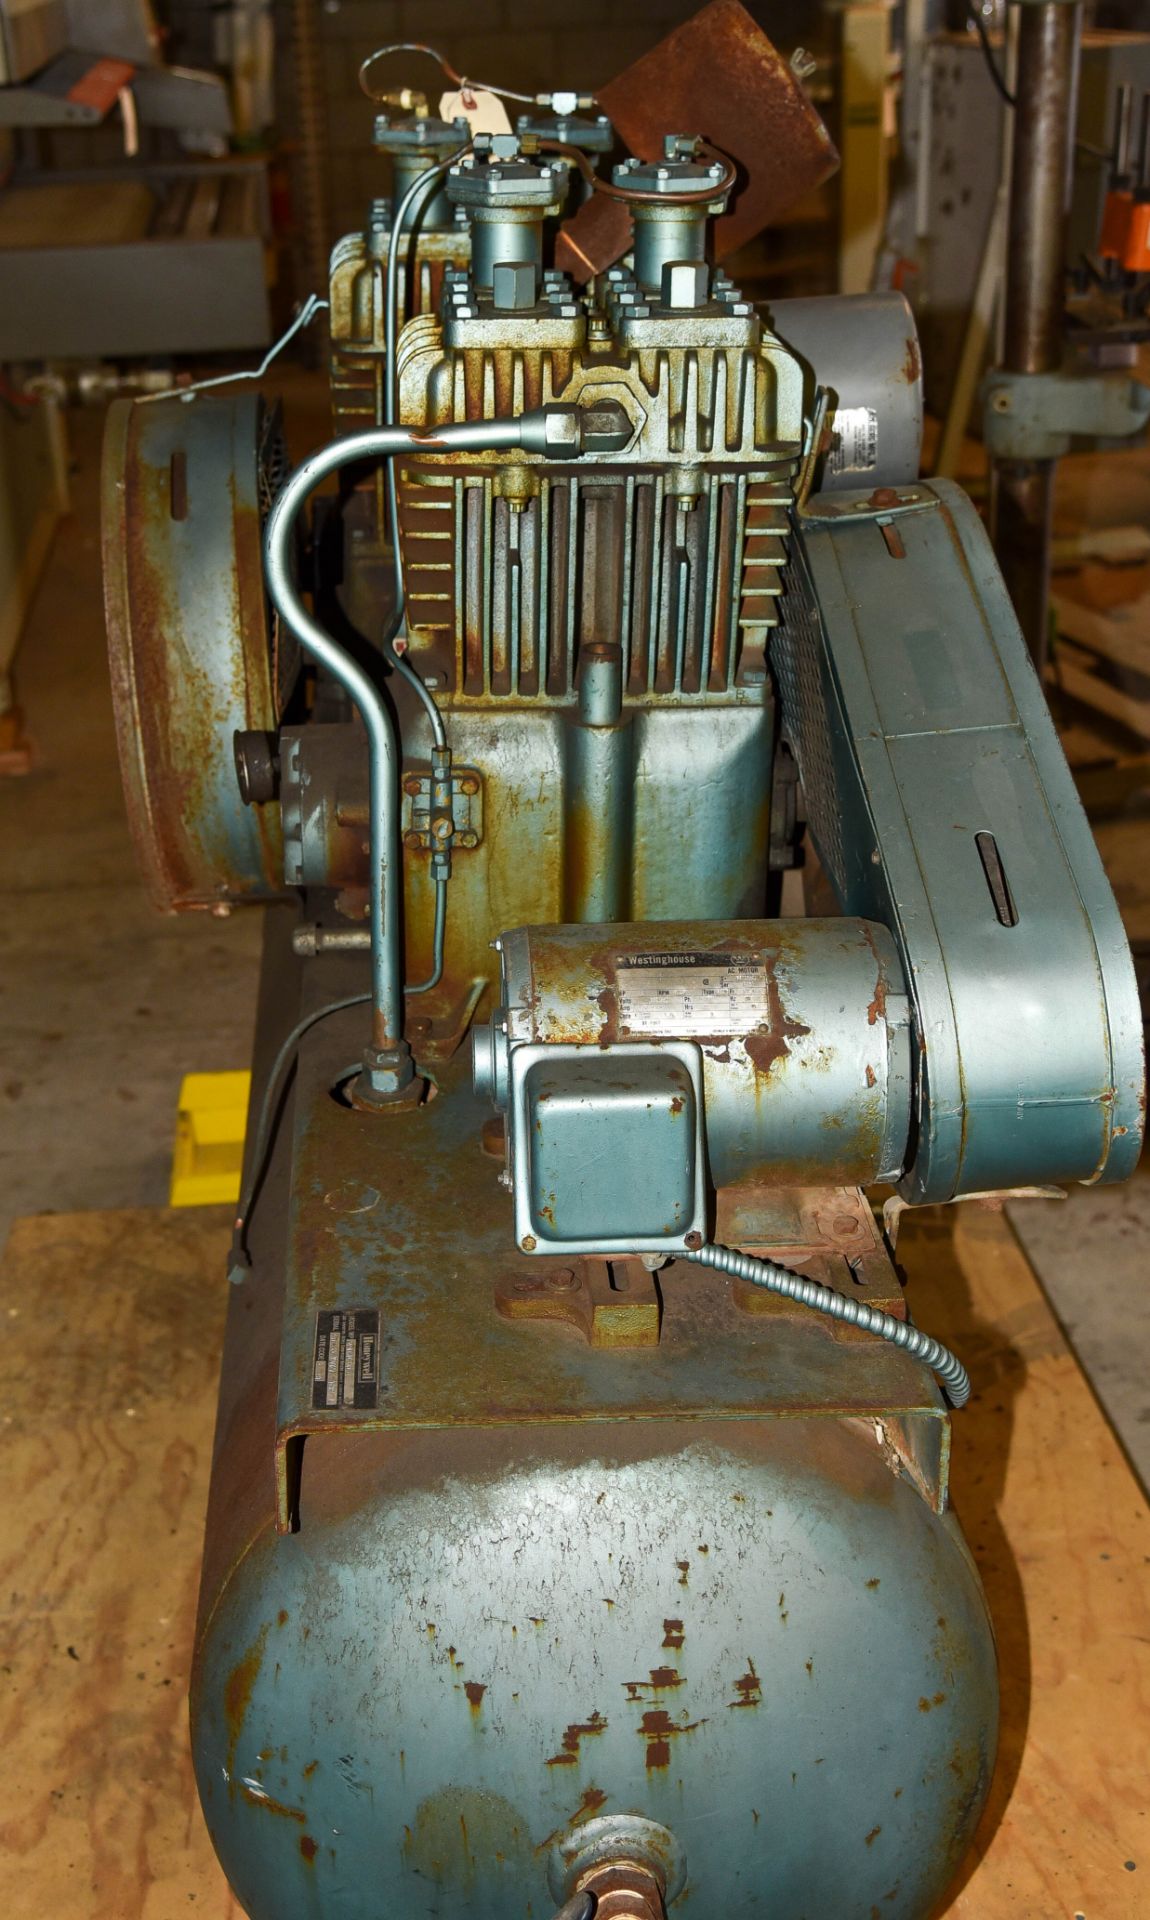 Quincy Air Compressor, 2 - 5 hp Motors and 2 - 5 hp Pumps, 60 Gallon Tank - Needs Work - Image 4 of 4